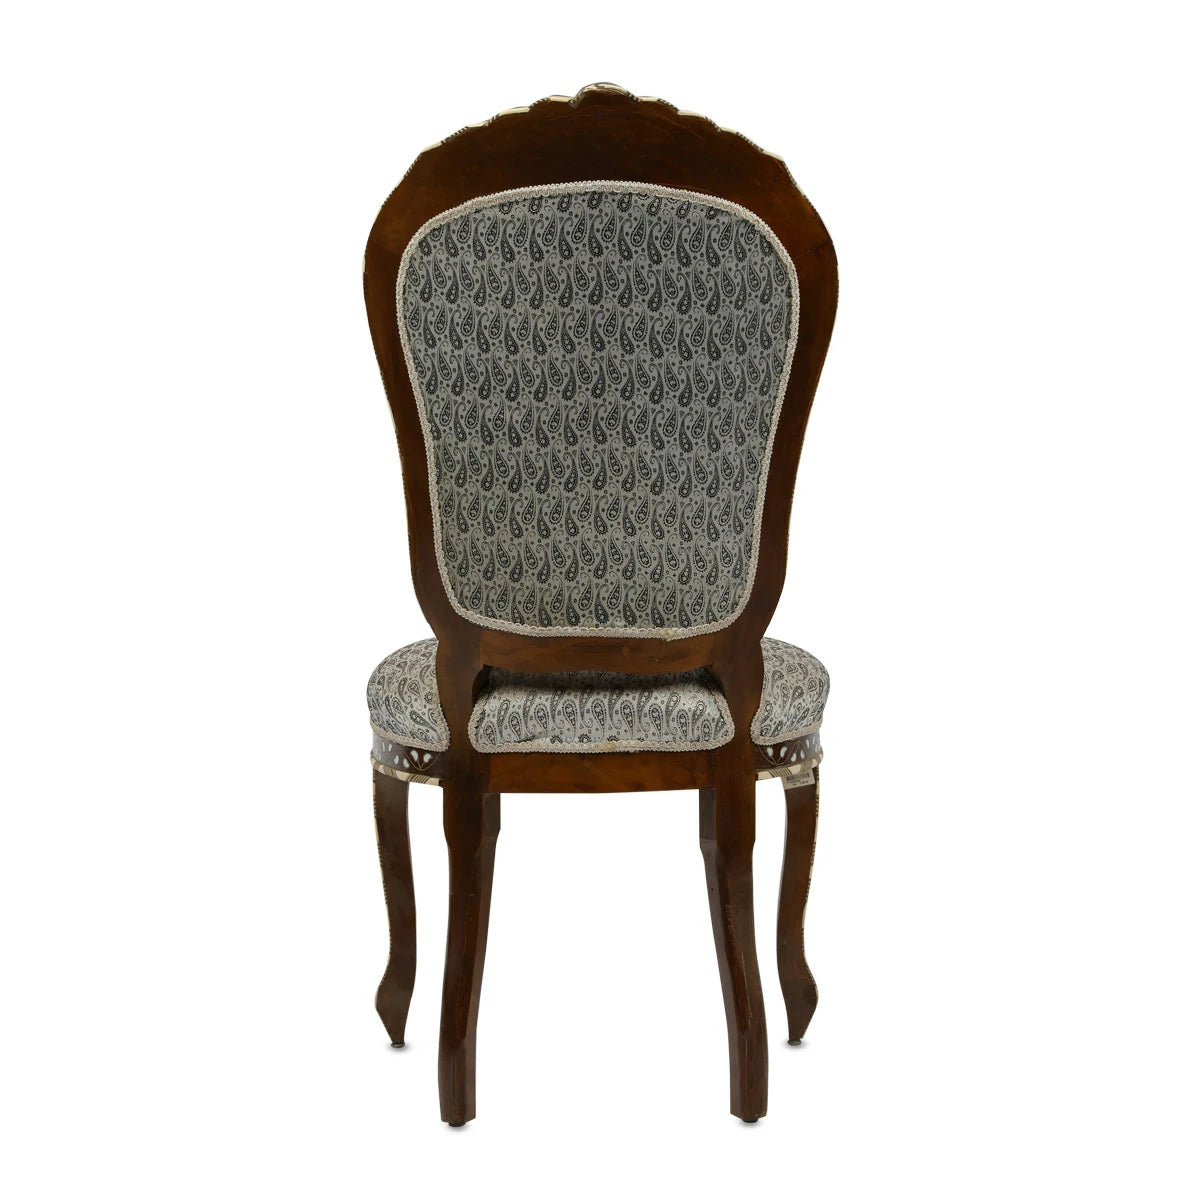 Handmade Mother of Pearl & Camel Bone Inlaid Side Chair